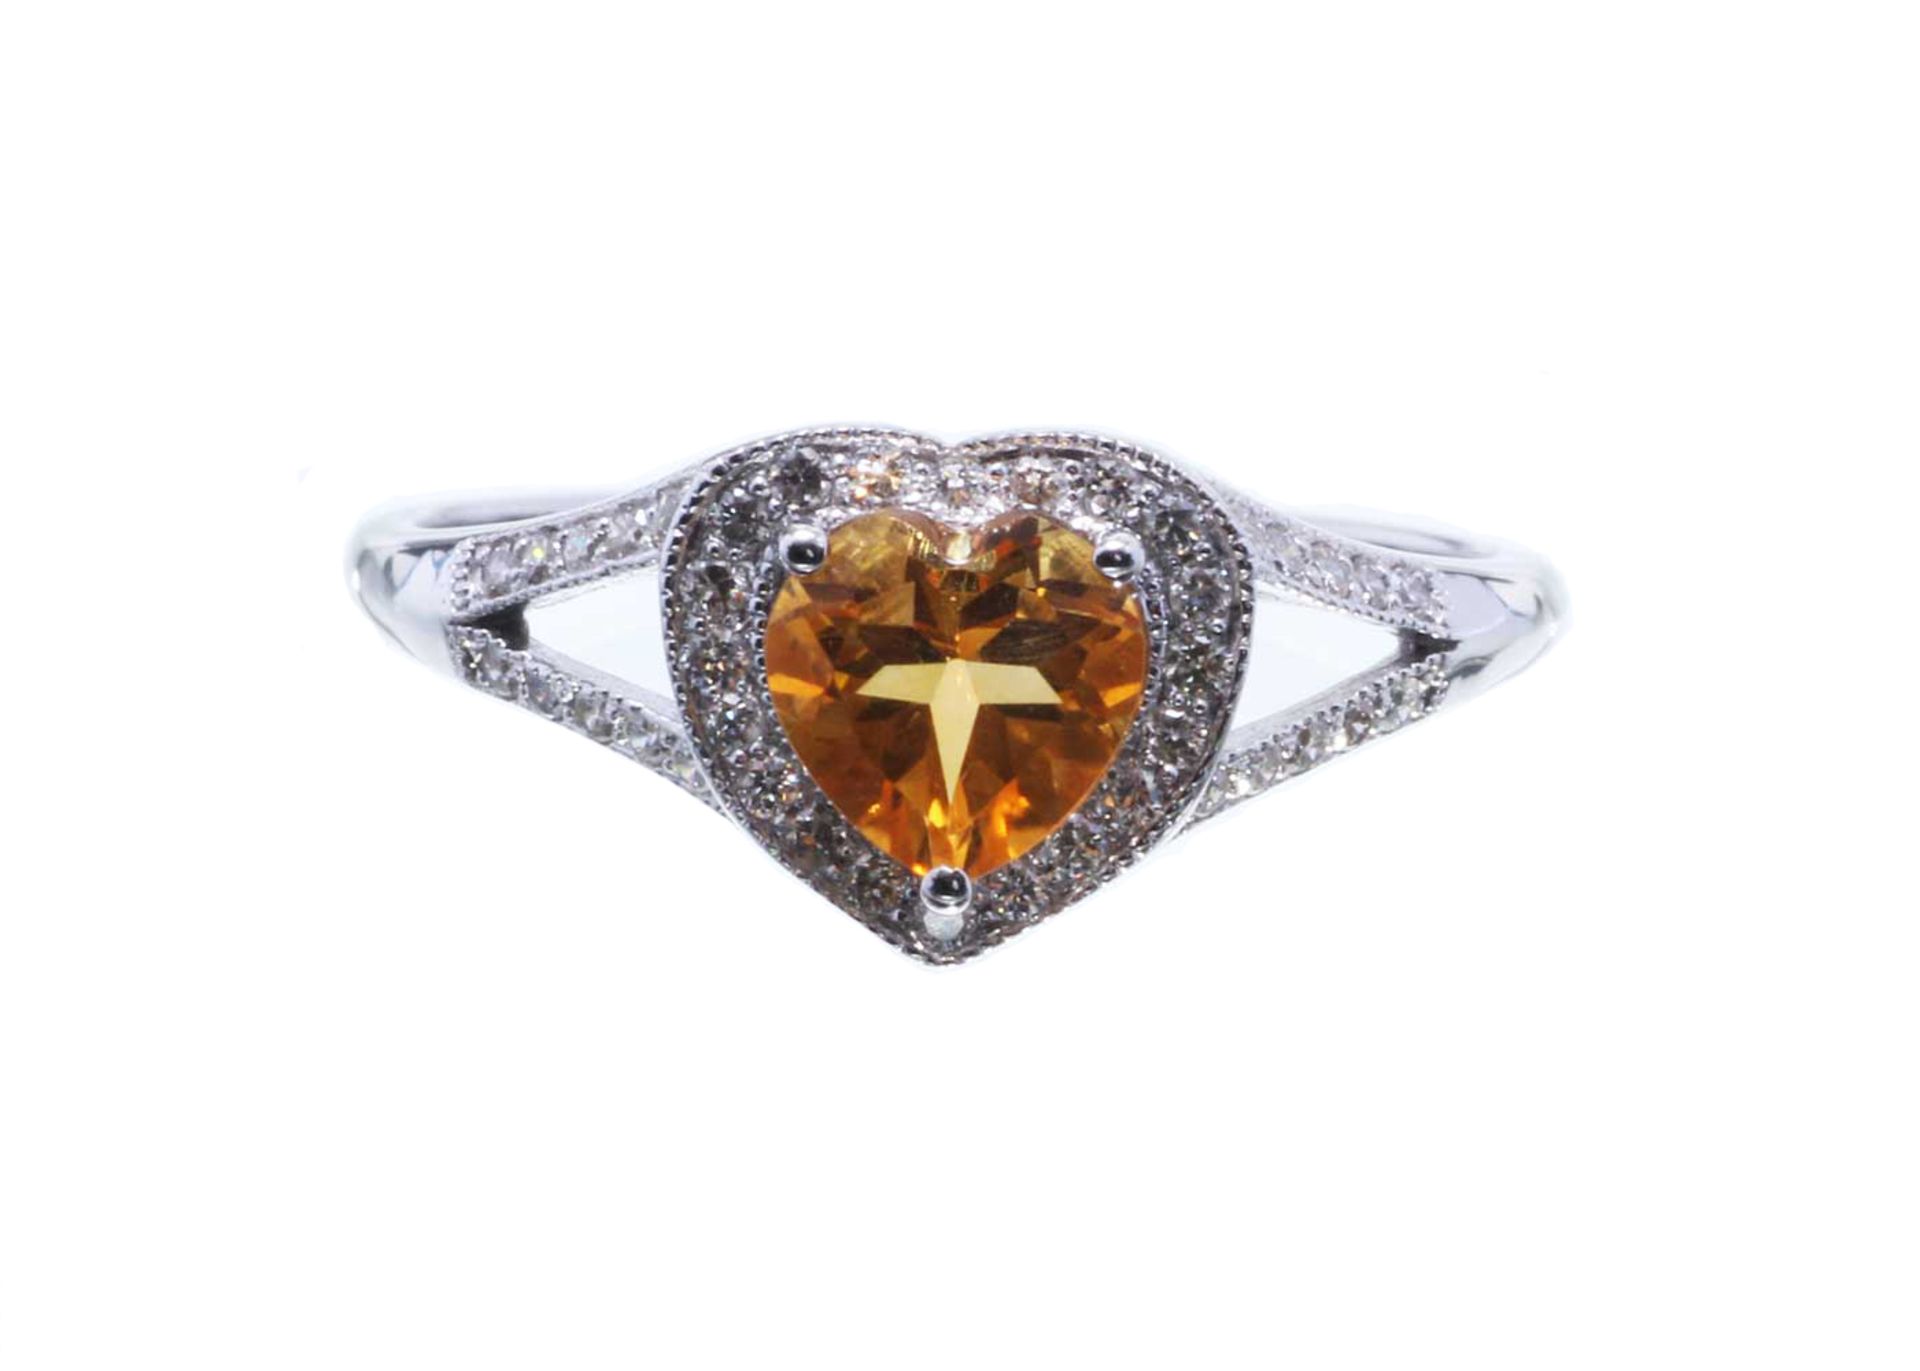 9ct White Gold Heart Shape Citrine Diamond Ring 0.20 Carats - Valued by GIE £2,445.00 - 9ct White - Image 4 of 5